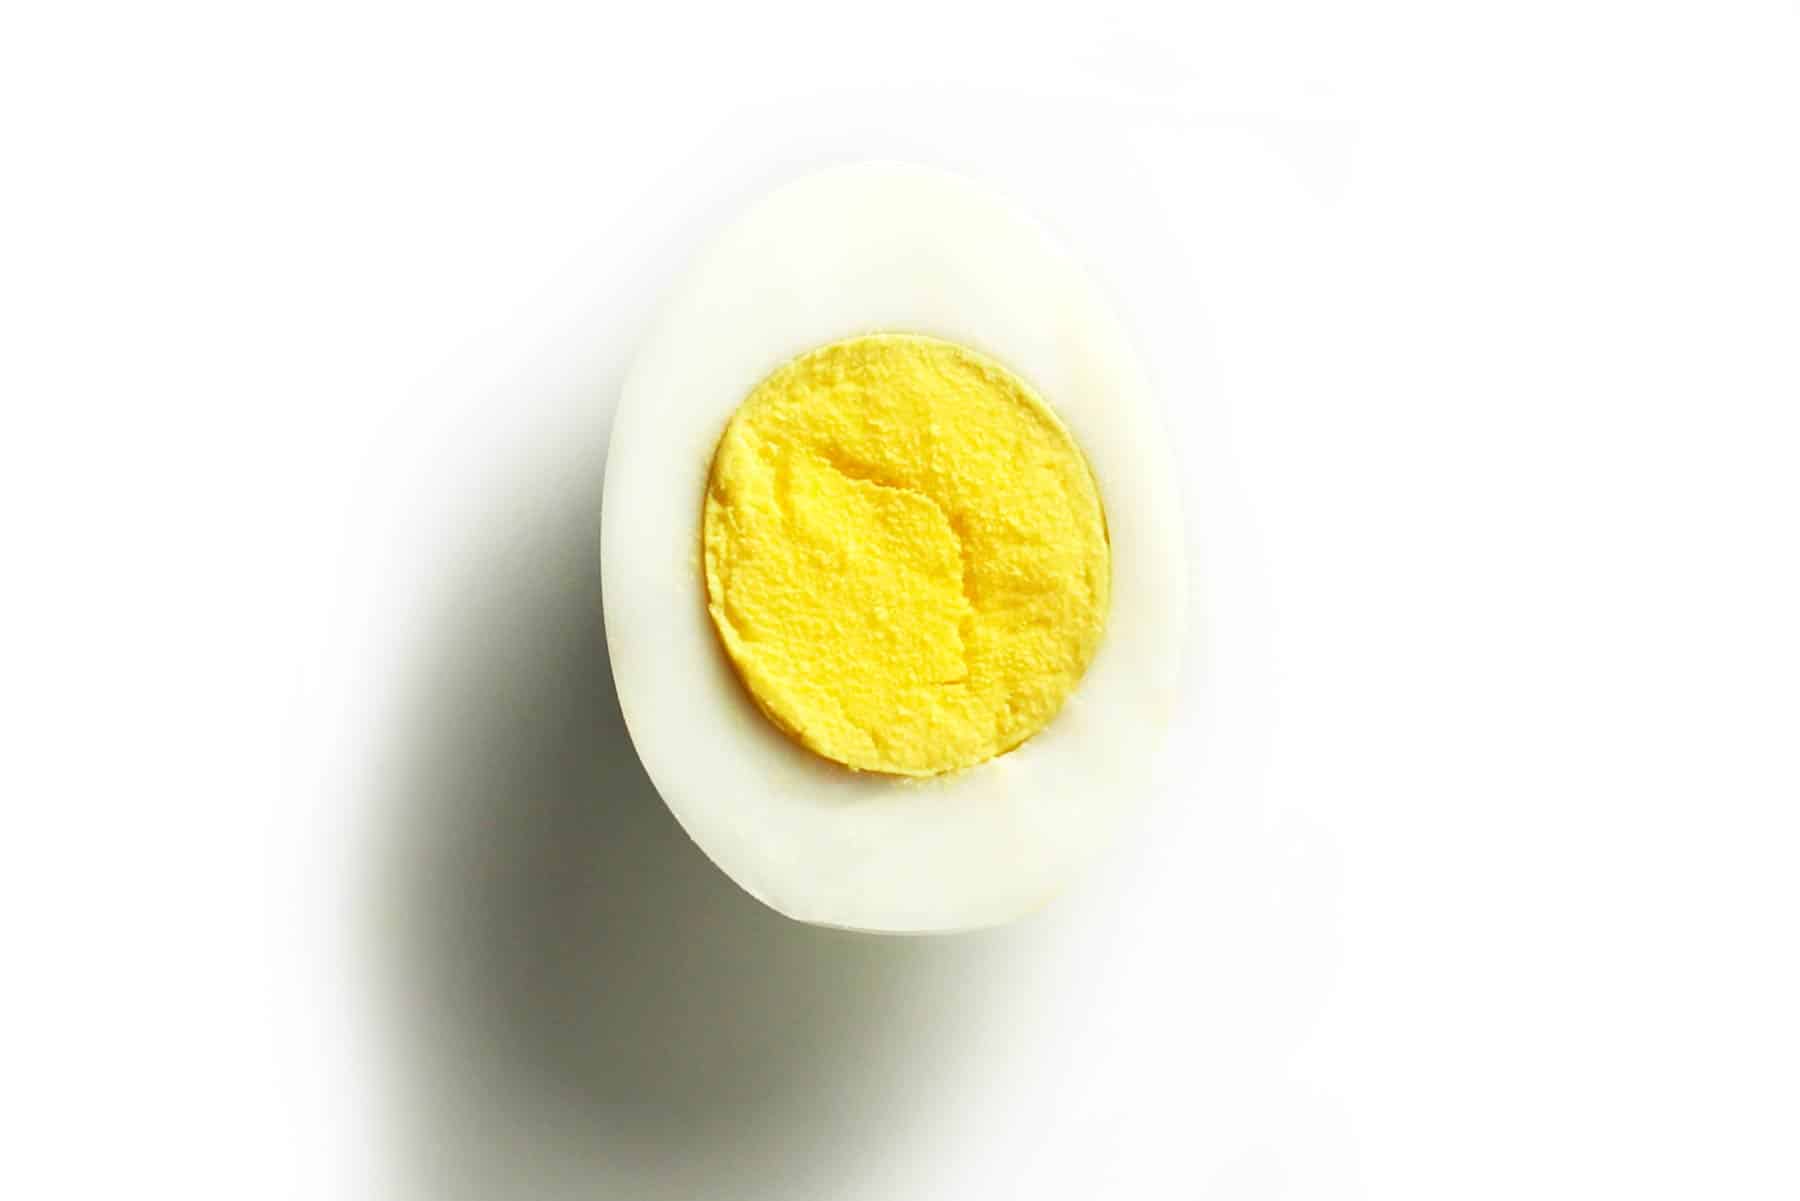 How to Make Perfect Hard Boiled Eggs - Add a Pinch